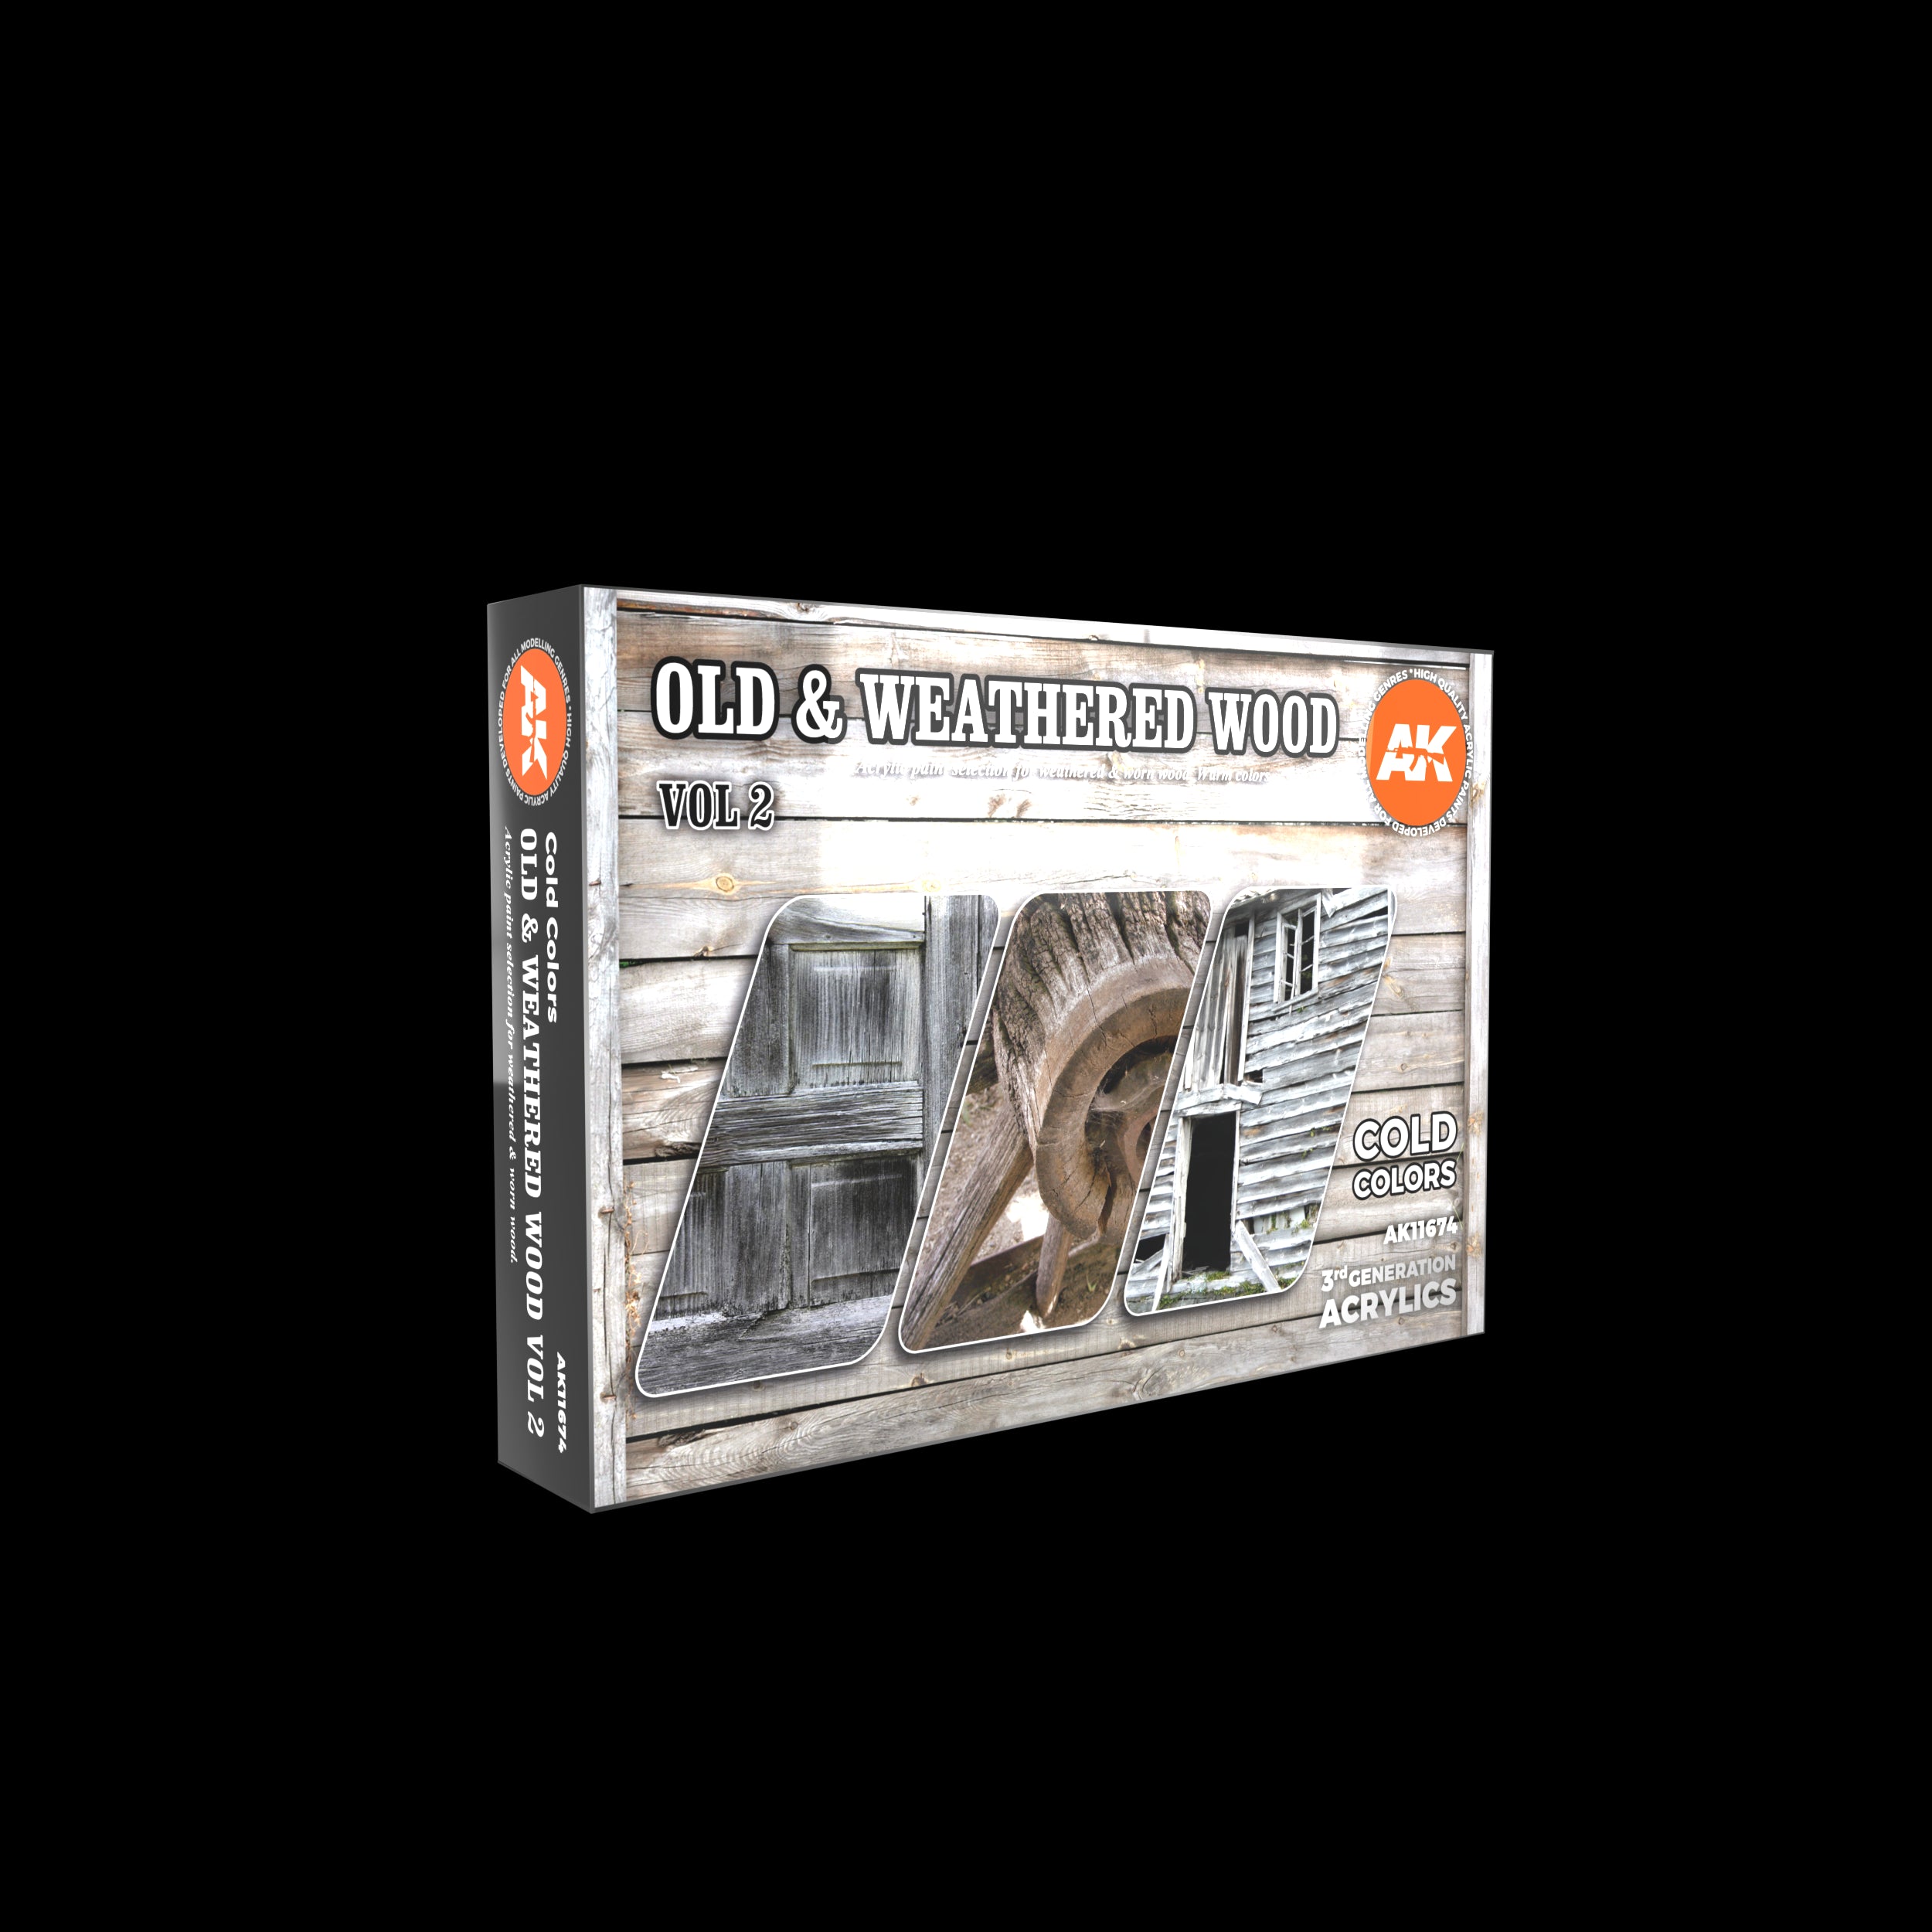 3G Old & Weathered Wood Vol.2 Paint Set by AK Interactive